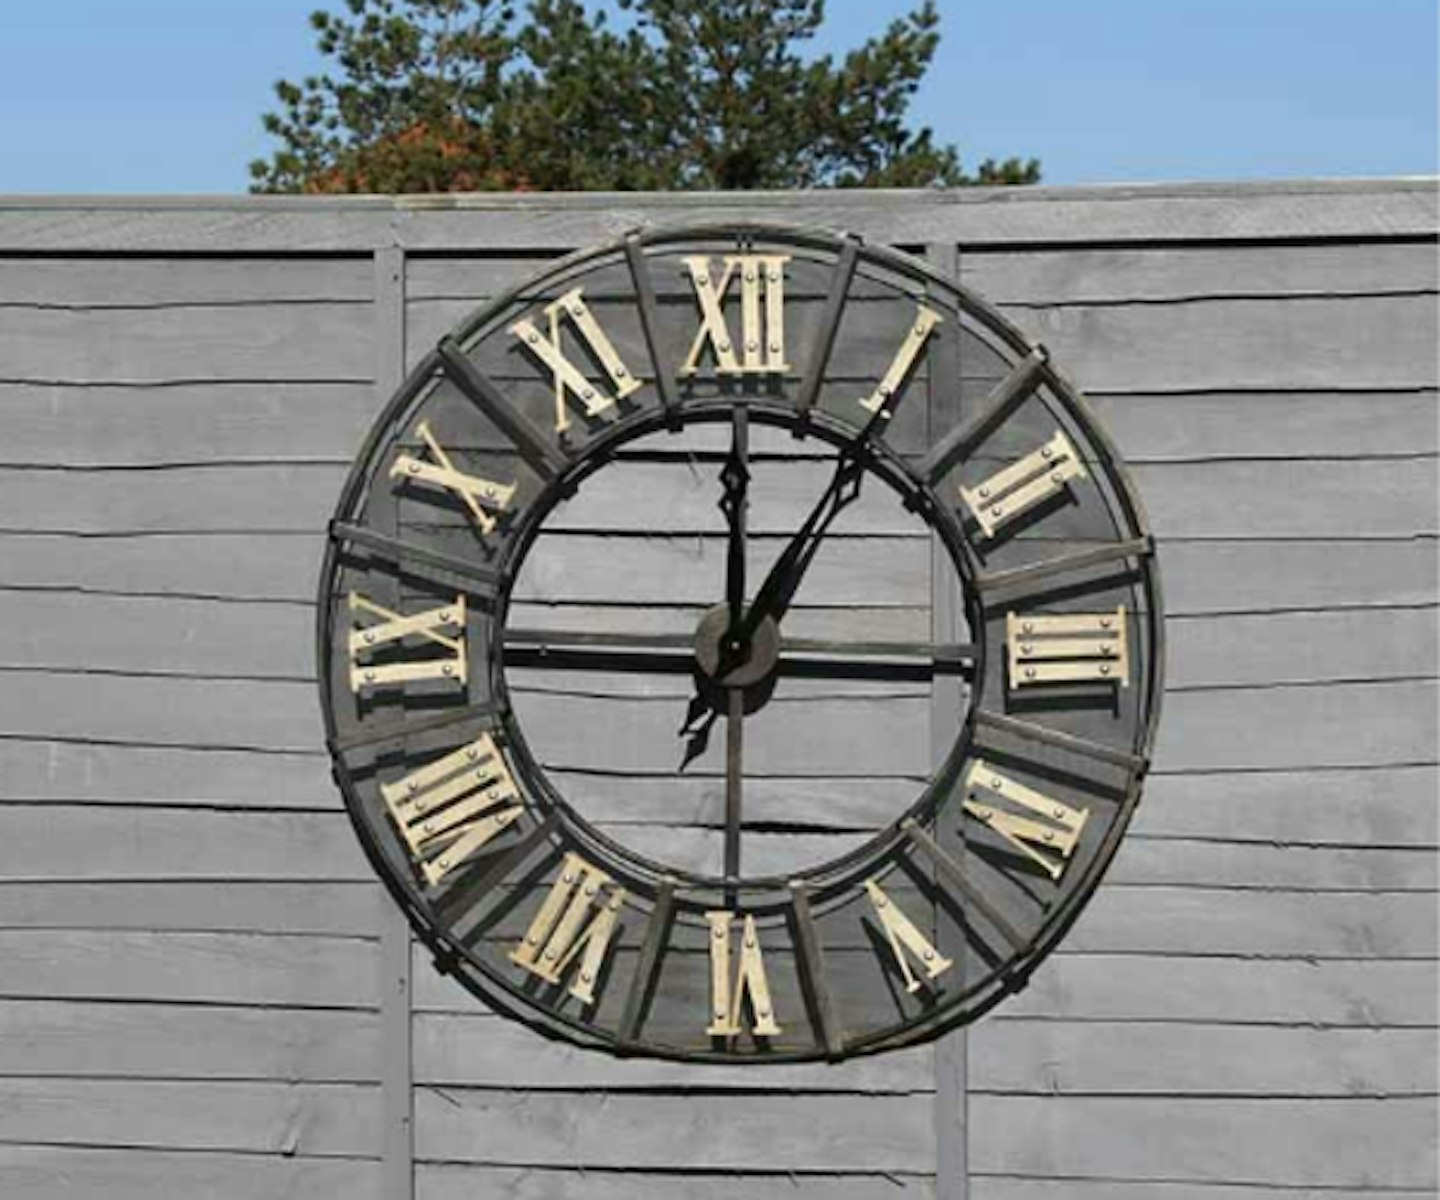 Charles Bentley Large Wrought Iron Wall Clock Black and Gold